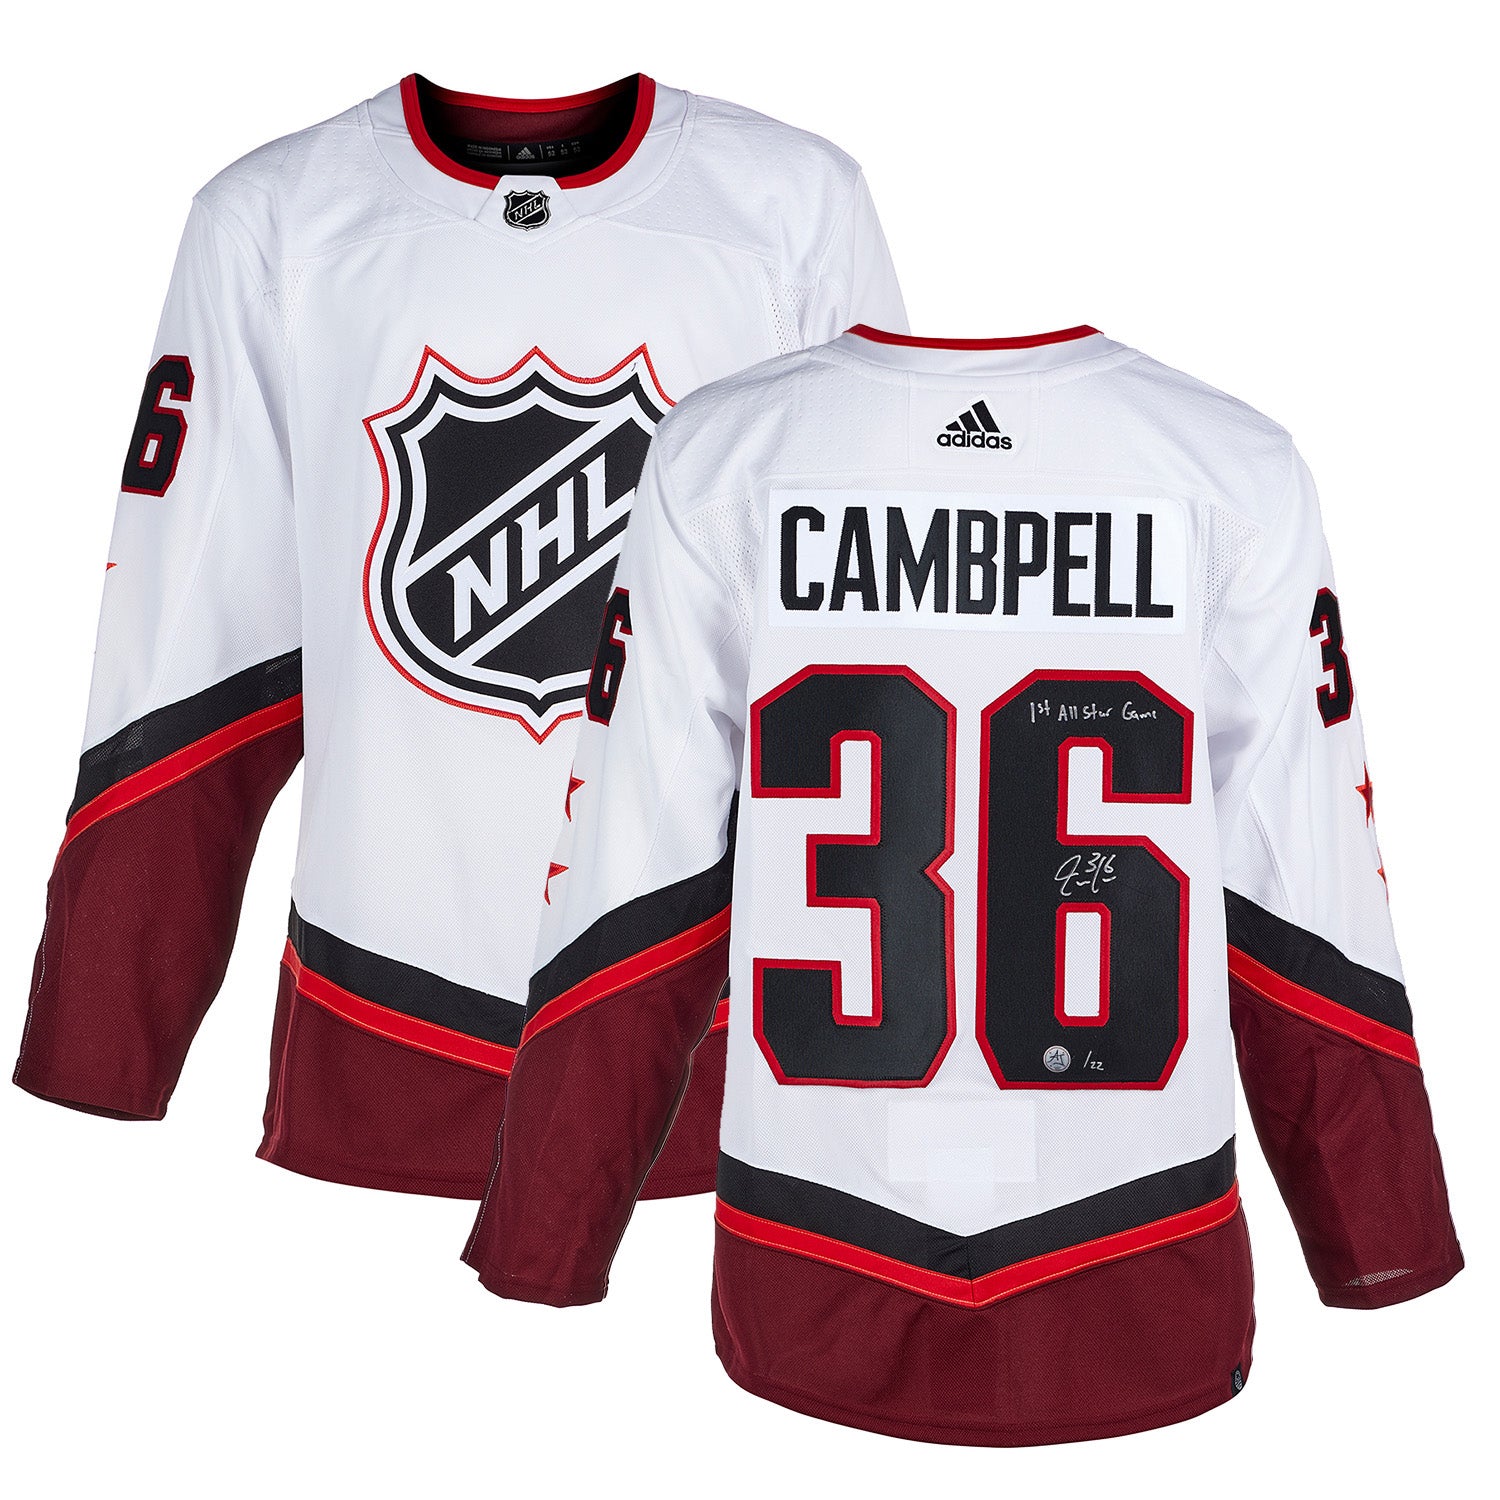 Jack Campbell Autographed Toronto Maple Leafs Home Jersey - Adidas